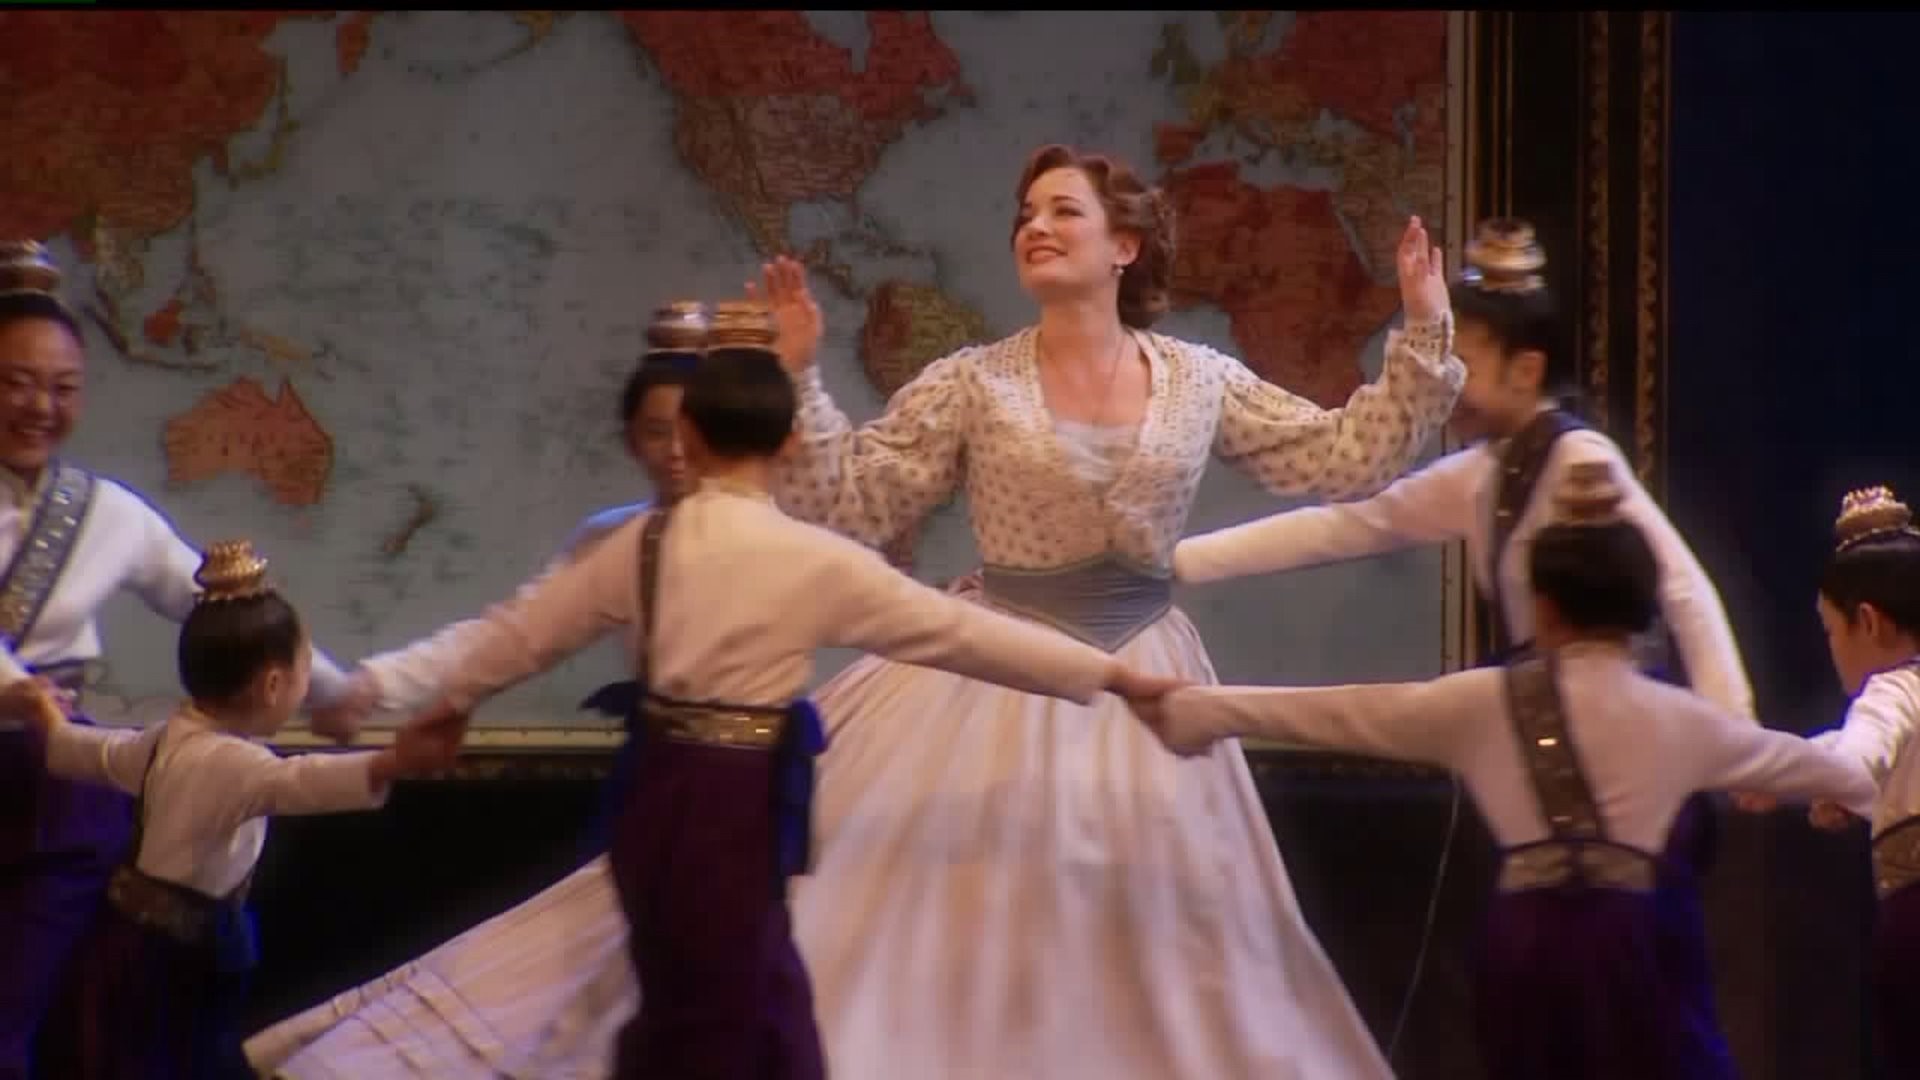 CENTER STAGE: Shall we dance? Visit 19th Century Siam in "The King and I" at Hershey Theatre